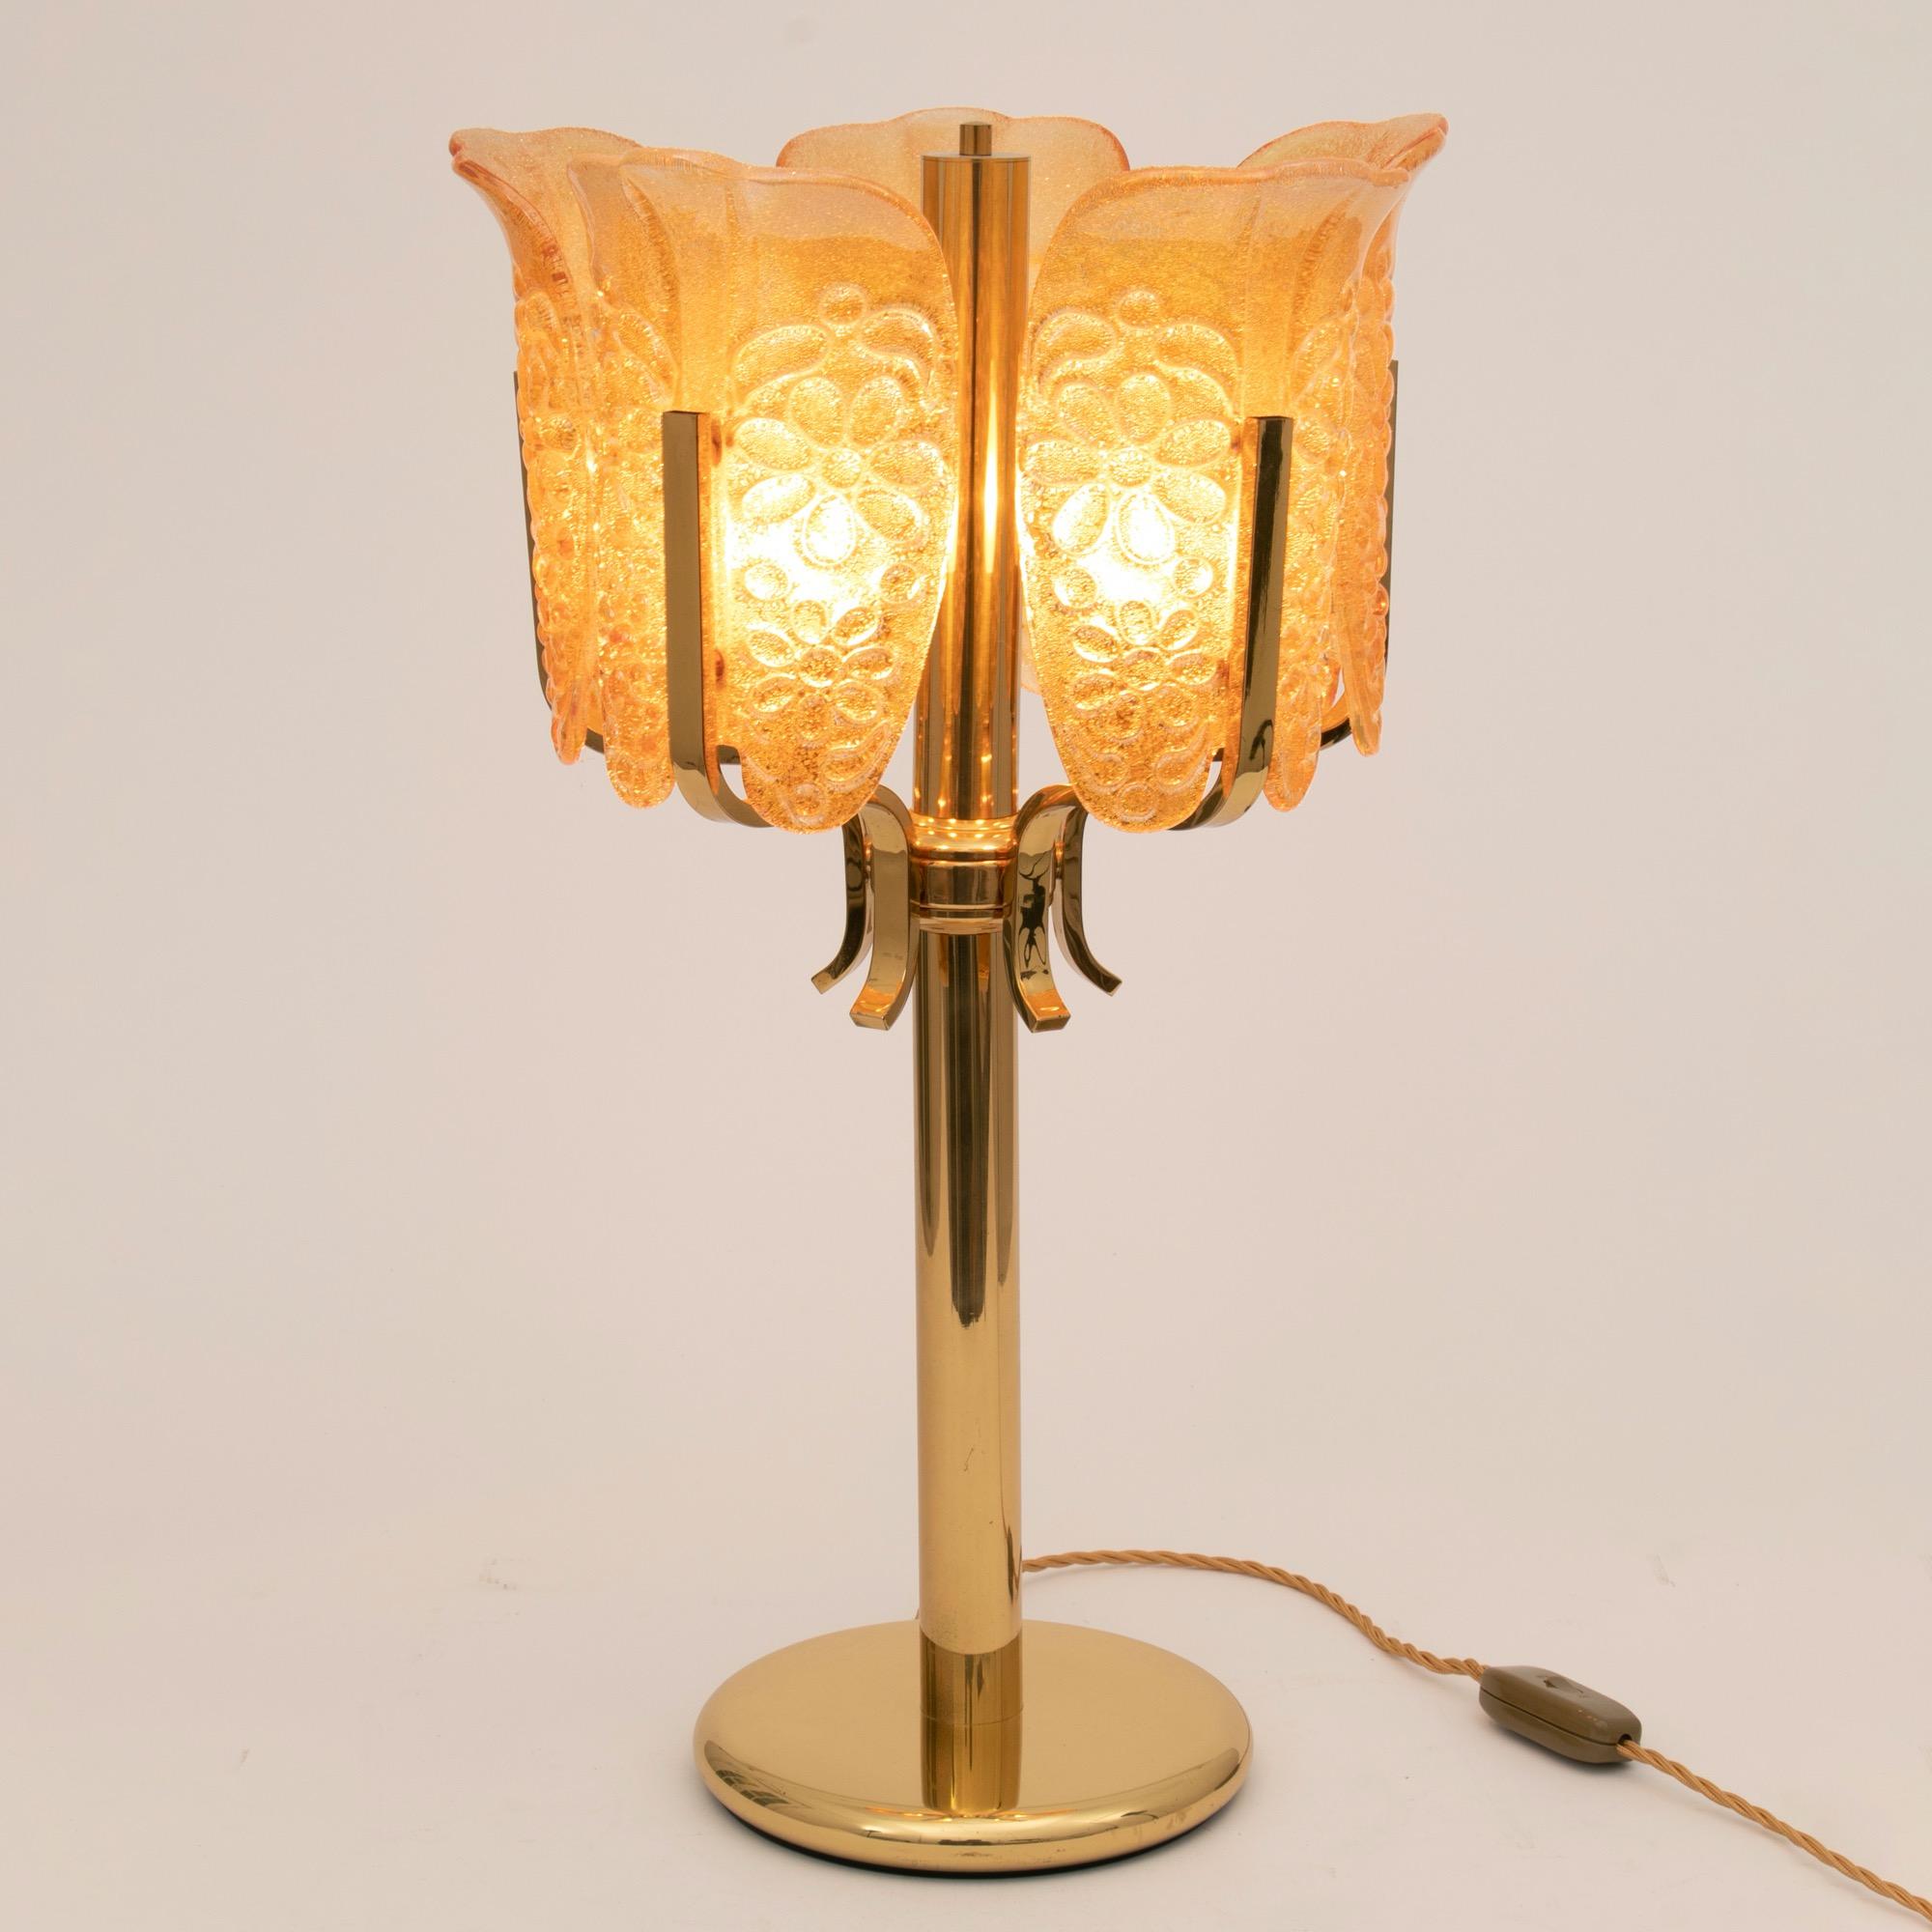 A midcentury Carl Fagerlund five branch brass and orrefors glass table lamp
with unusual floral embossed amber glass shades
Italy, circa 1960
Measures: H 63cm, W 36cm, D 36cm.